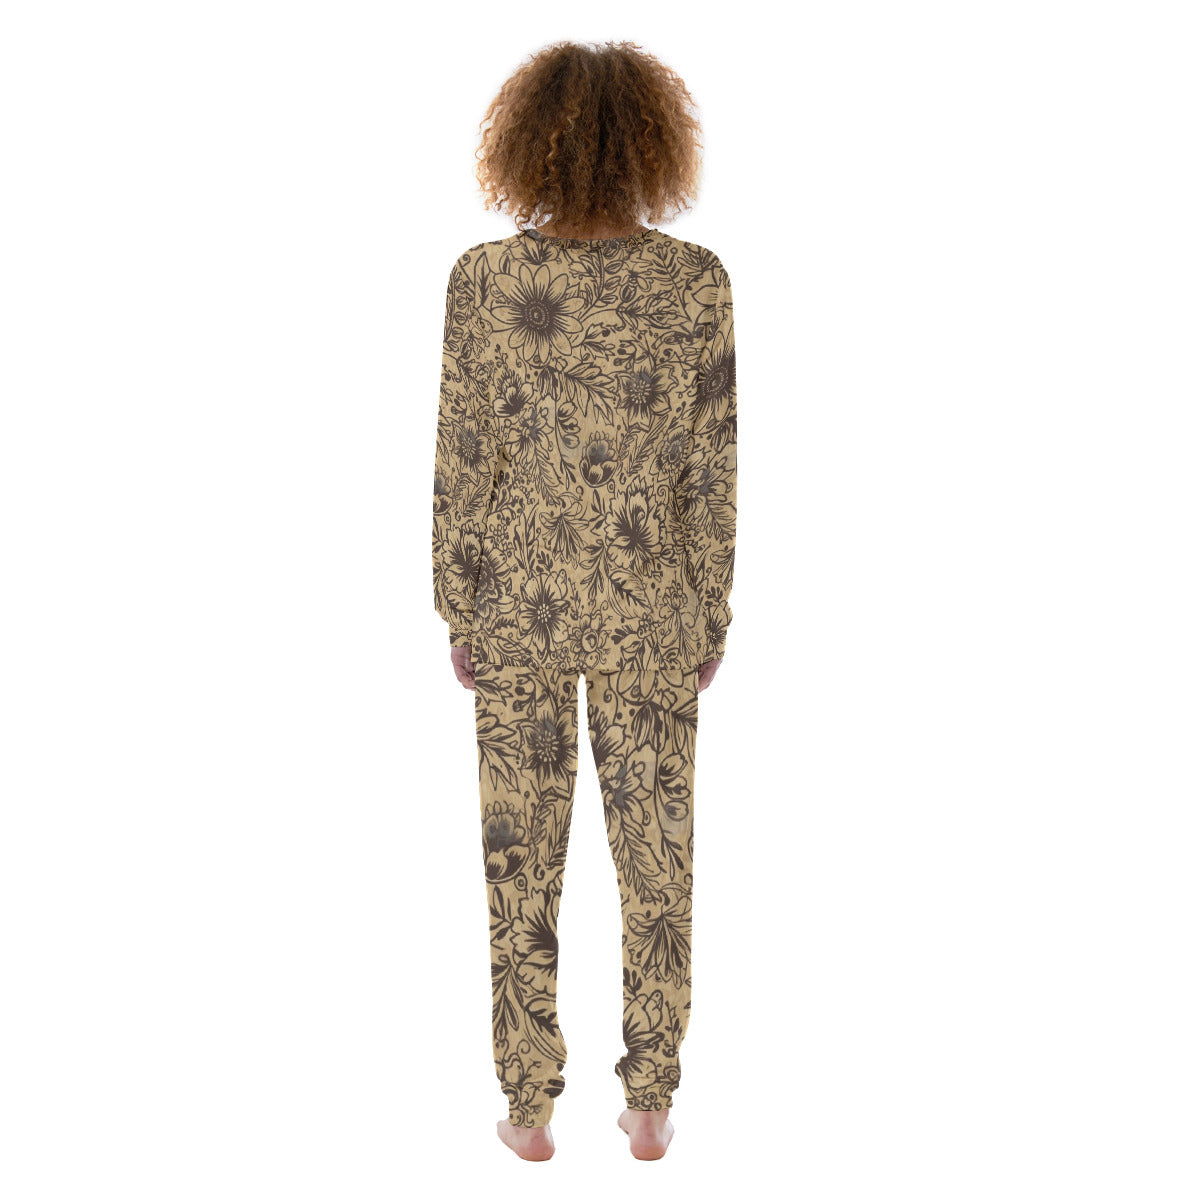 Praline Pear Floral 100% Cotton Pajama Set | Hypoallergenic - Allergy Friendly - Naturally Free